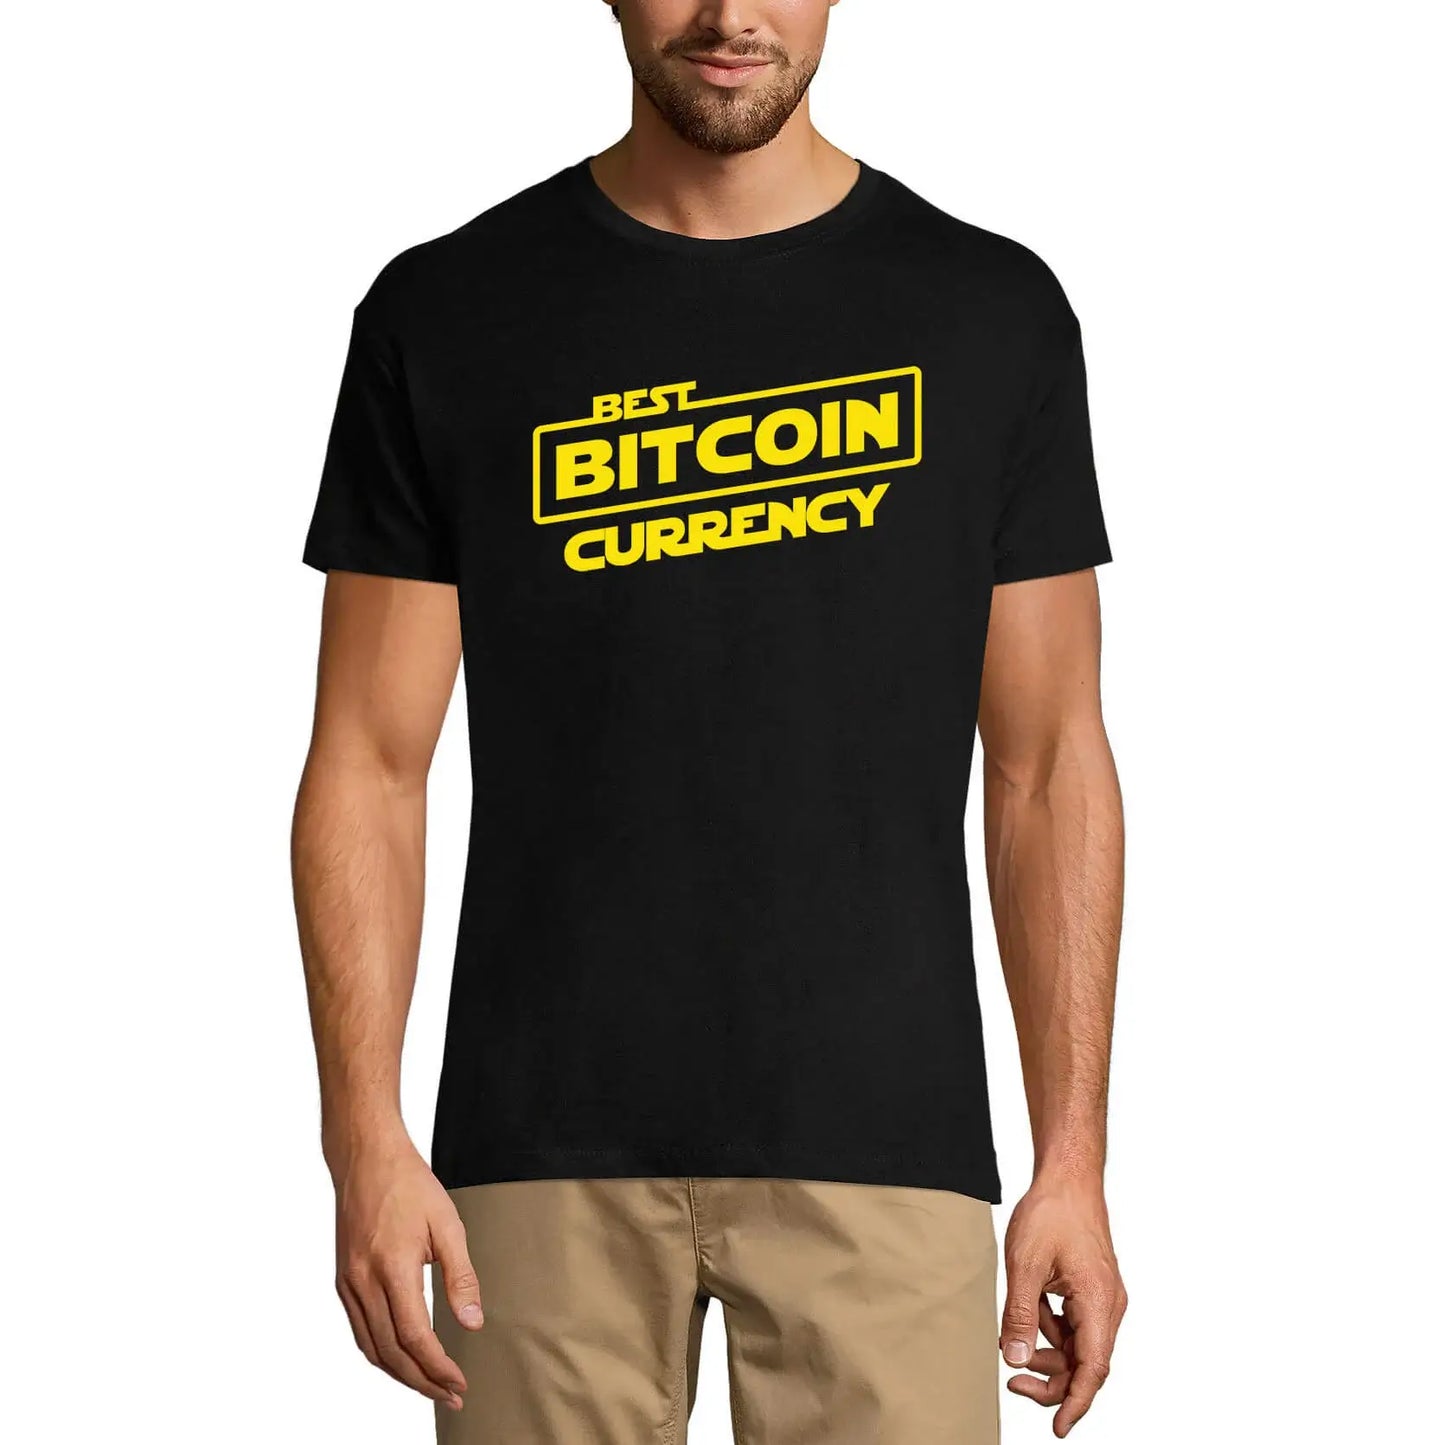 Men's Graphic T-Shirt Best Bitcoin Currency - Blockchain Currency Eco-Friendly Limited Edition Short Sleeve Tee-Shirt Vintage Birthday Gift Novelty